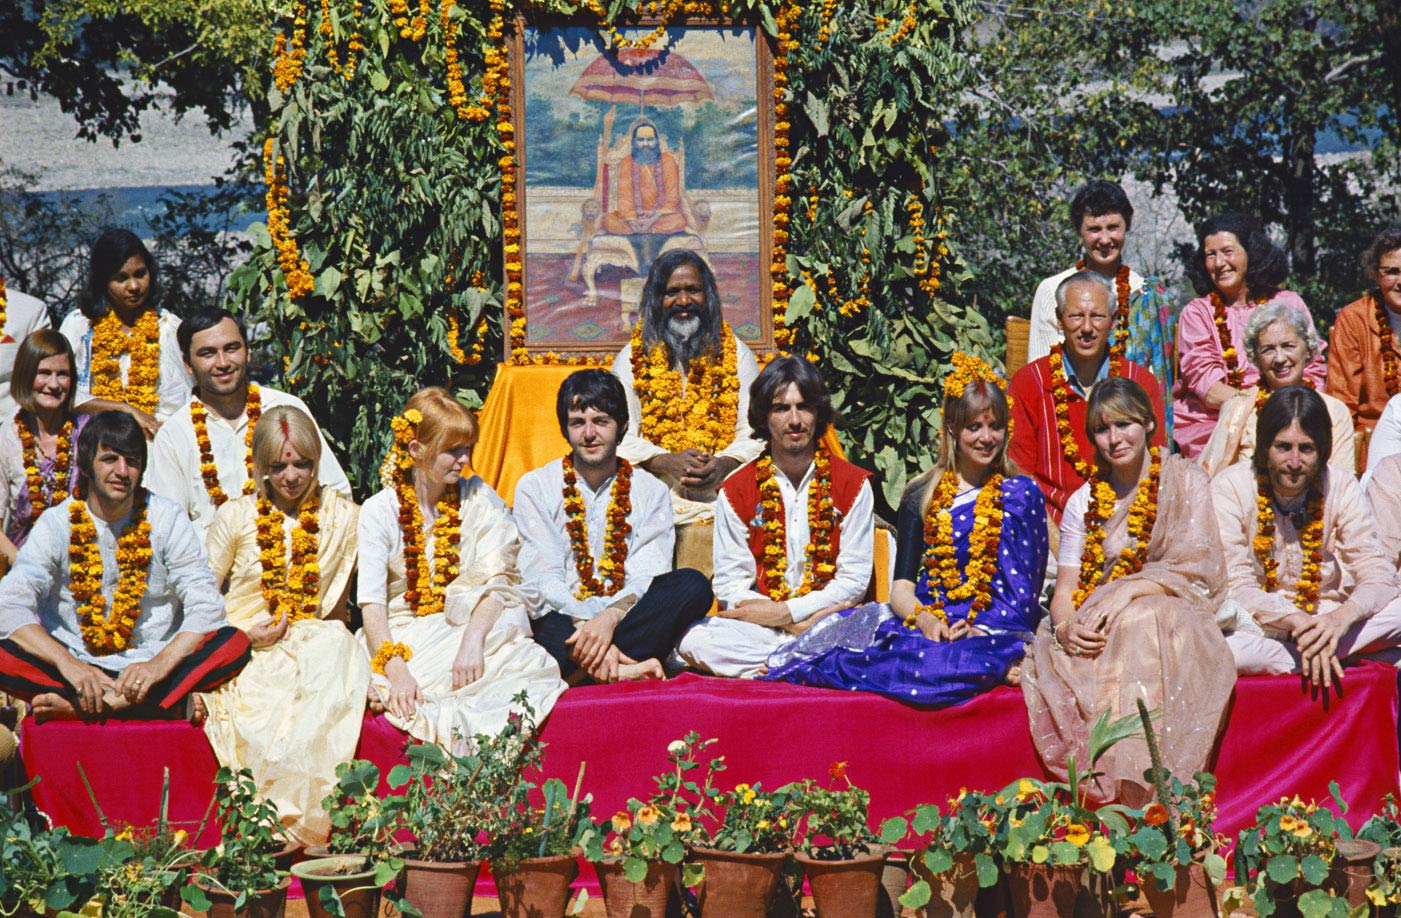 The Beatles reinvented themselves in Rishikesh